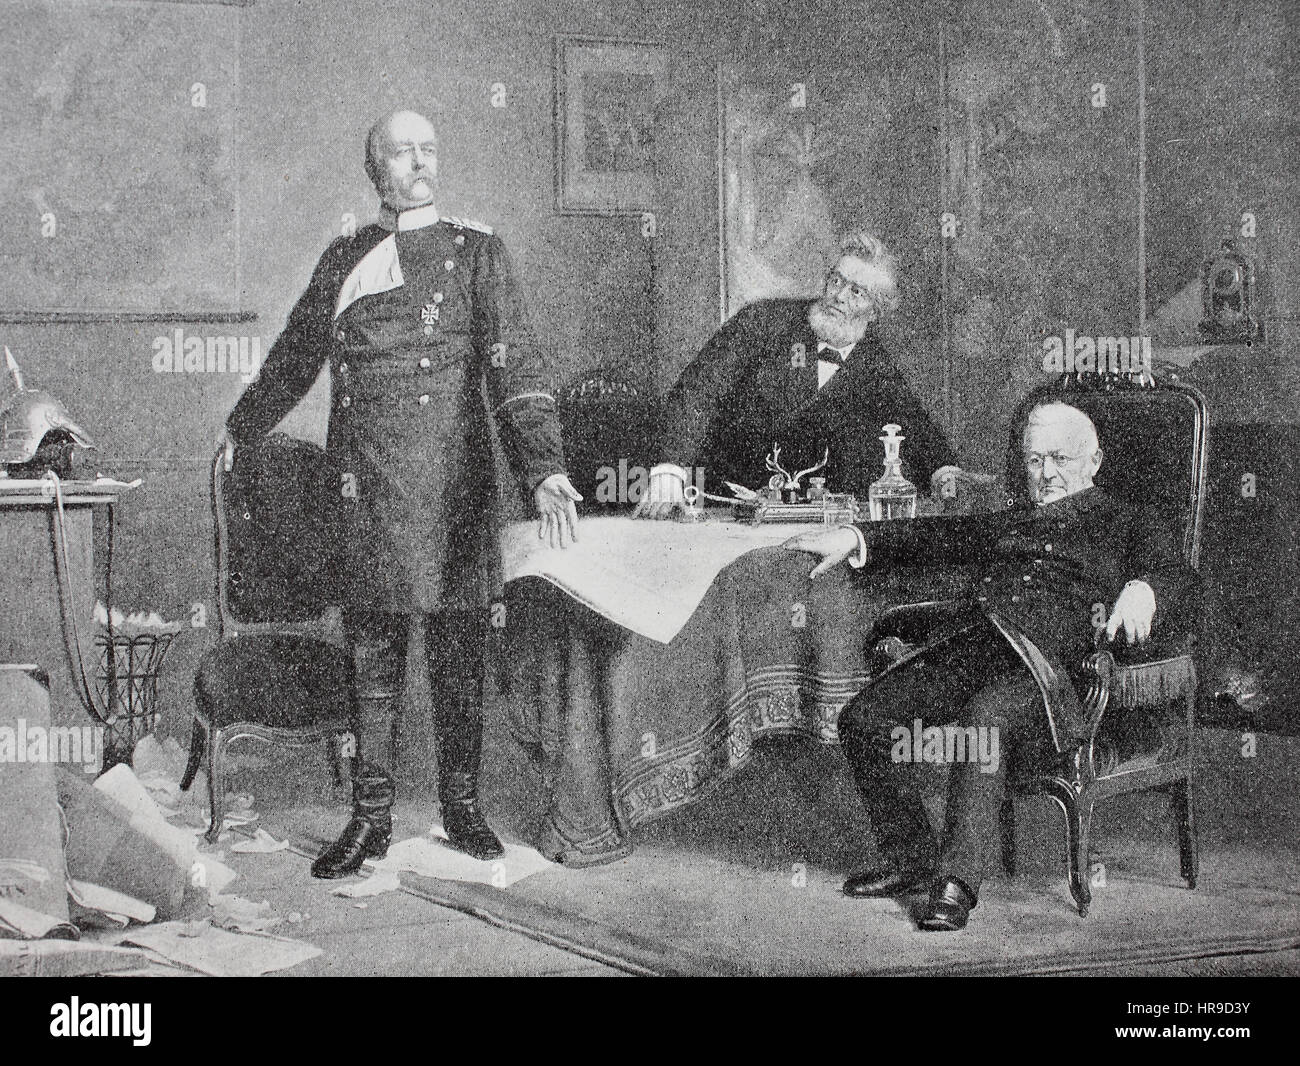 Birmarck verhandelt in Versailles mit Thiers und Favre. The Treaty of Versailles of 1871 ended the Franco-Prussian War and was signed by Adolphe Thiers, of the French Third Republic, and Otto von Bismarck, of the German Empire on 26 February 1871, Situation from the time of The Franco-Prussian War or Franco-German War,  Deutsch-Franzoesischer Krieg, 1870-1871, Reproduction of an original woodcut from the year 1885, digital improved Stock Photo